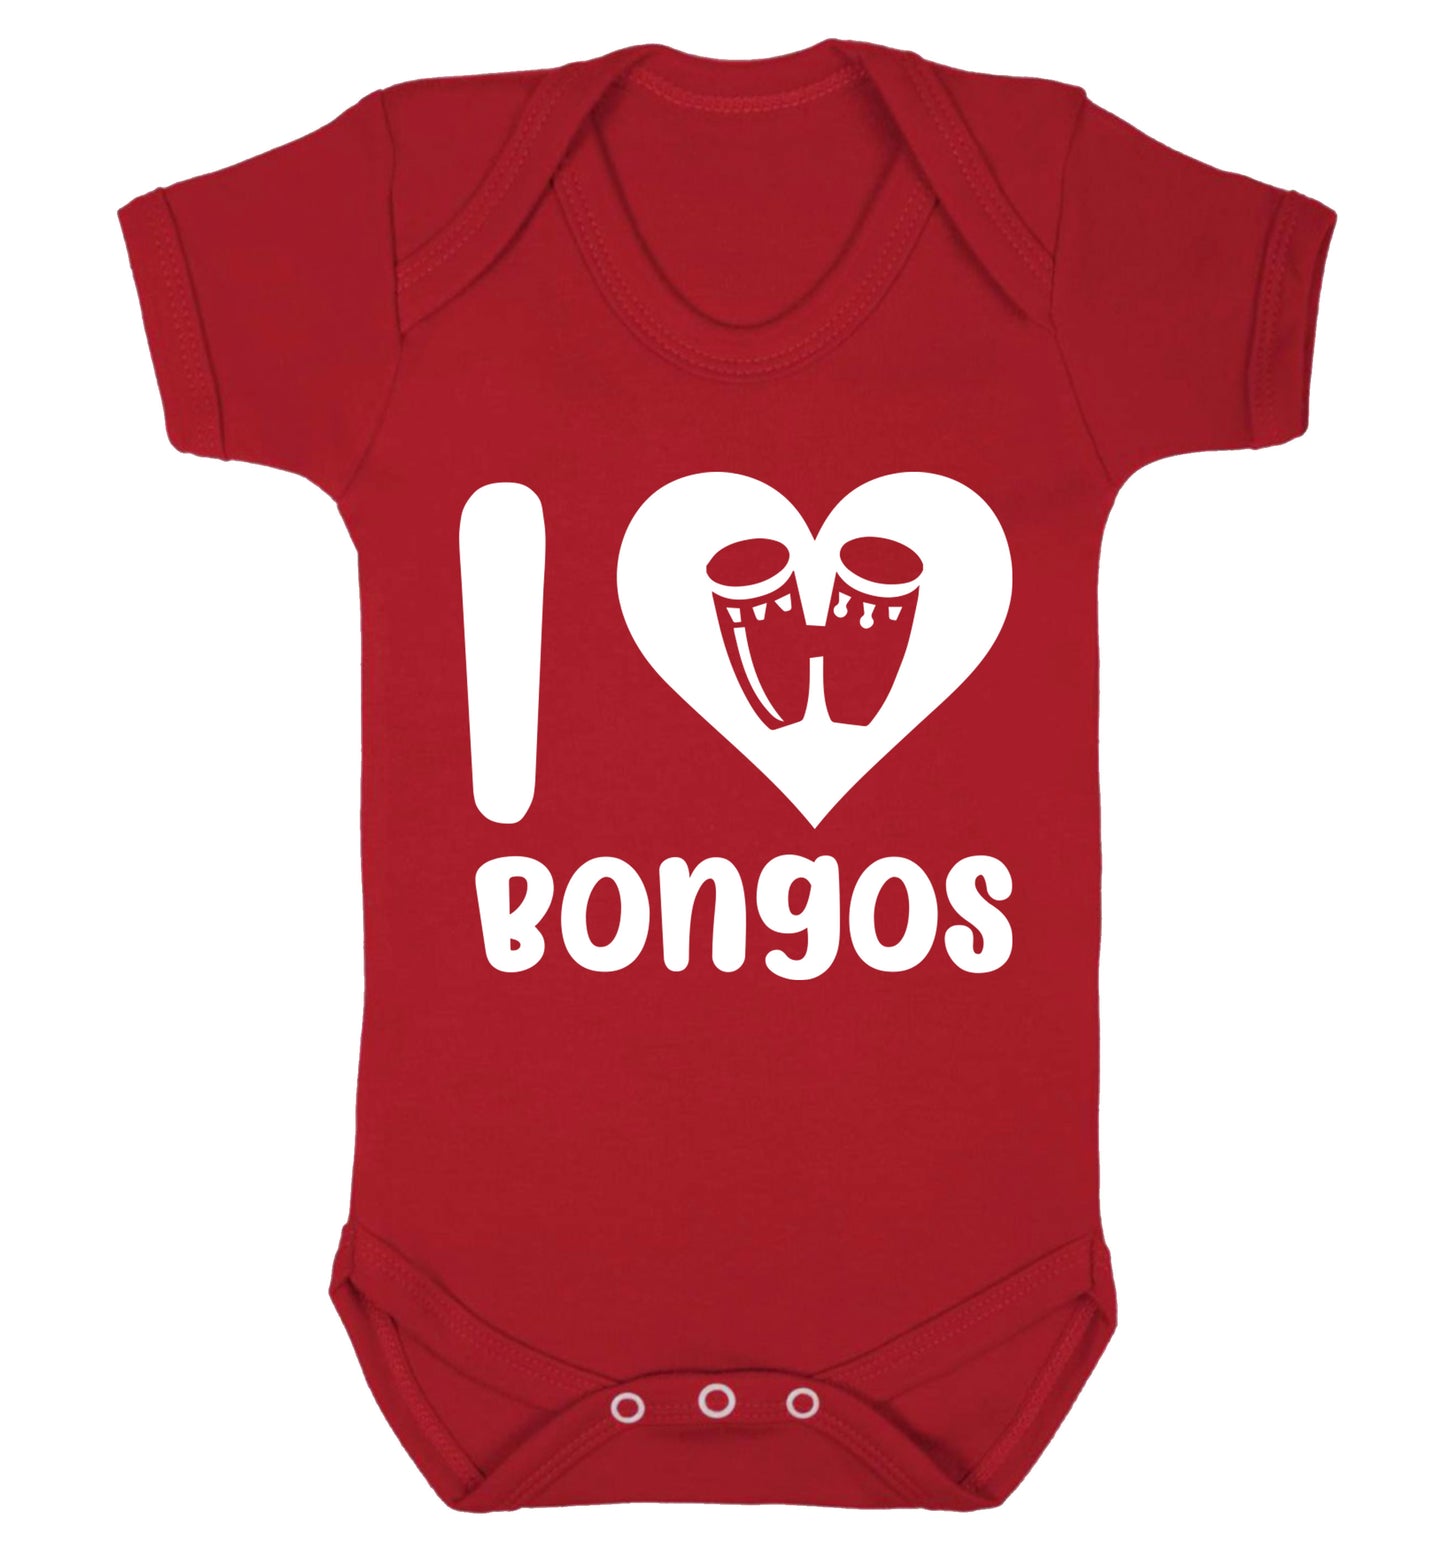 I love bongos Baby Vest red 18-24 months